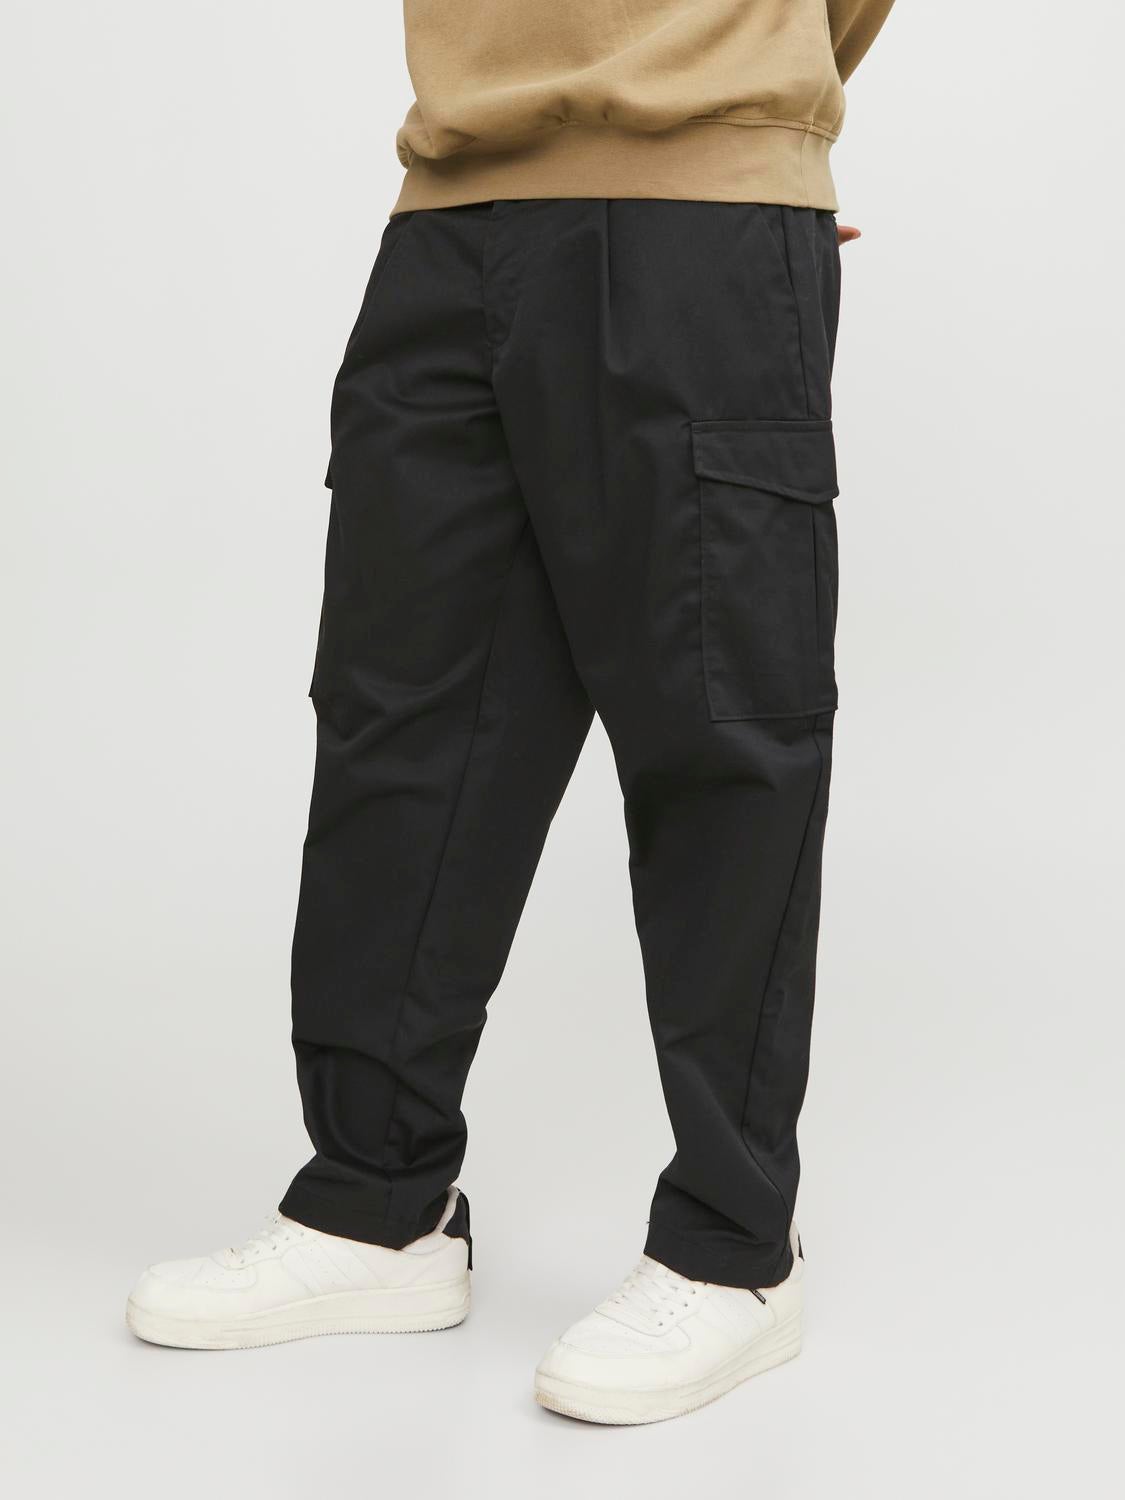 BRONCO ELASTIC WAIST CARGO TROUSER - BRONCO BSR : LARGE SIZE MENS CASUAL  TROUSERS